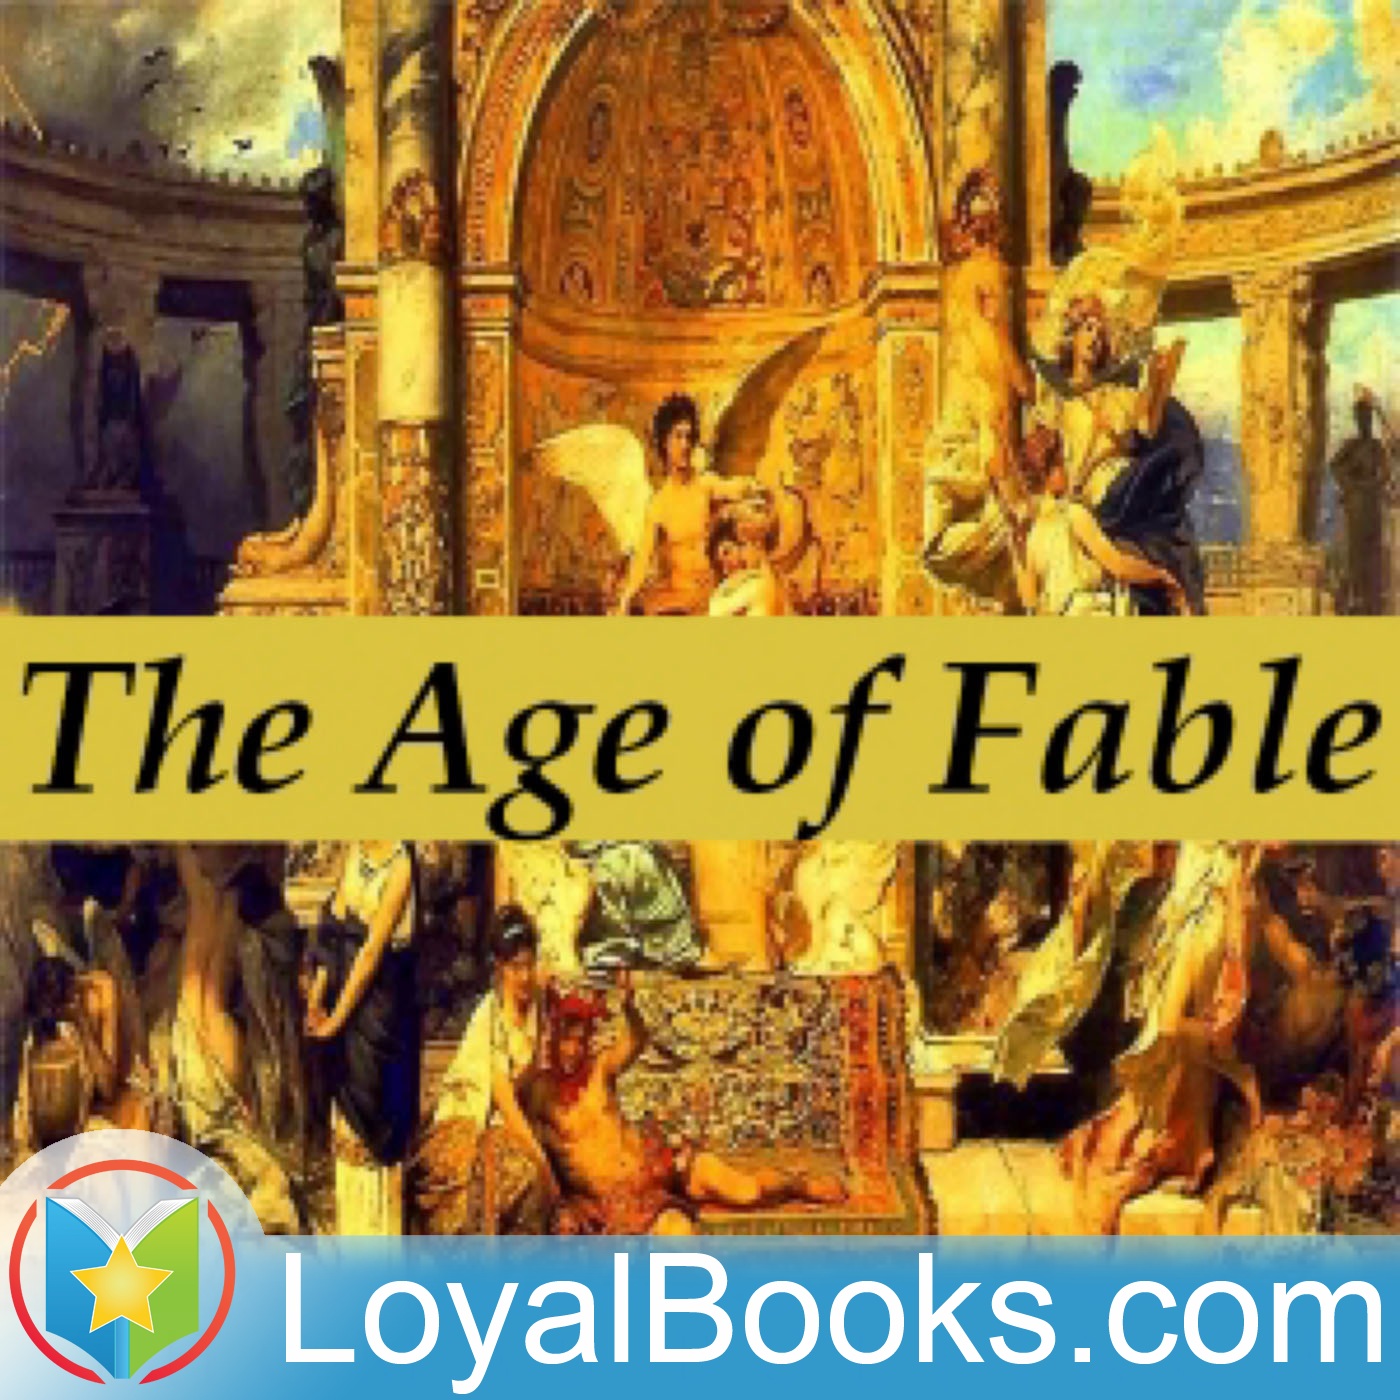 The Age of Fable: Chapter 01 – Introduction